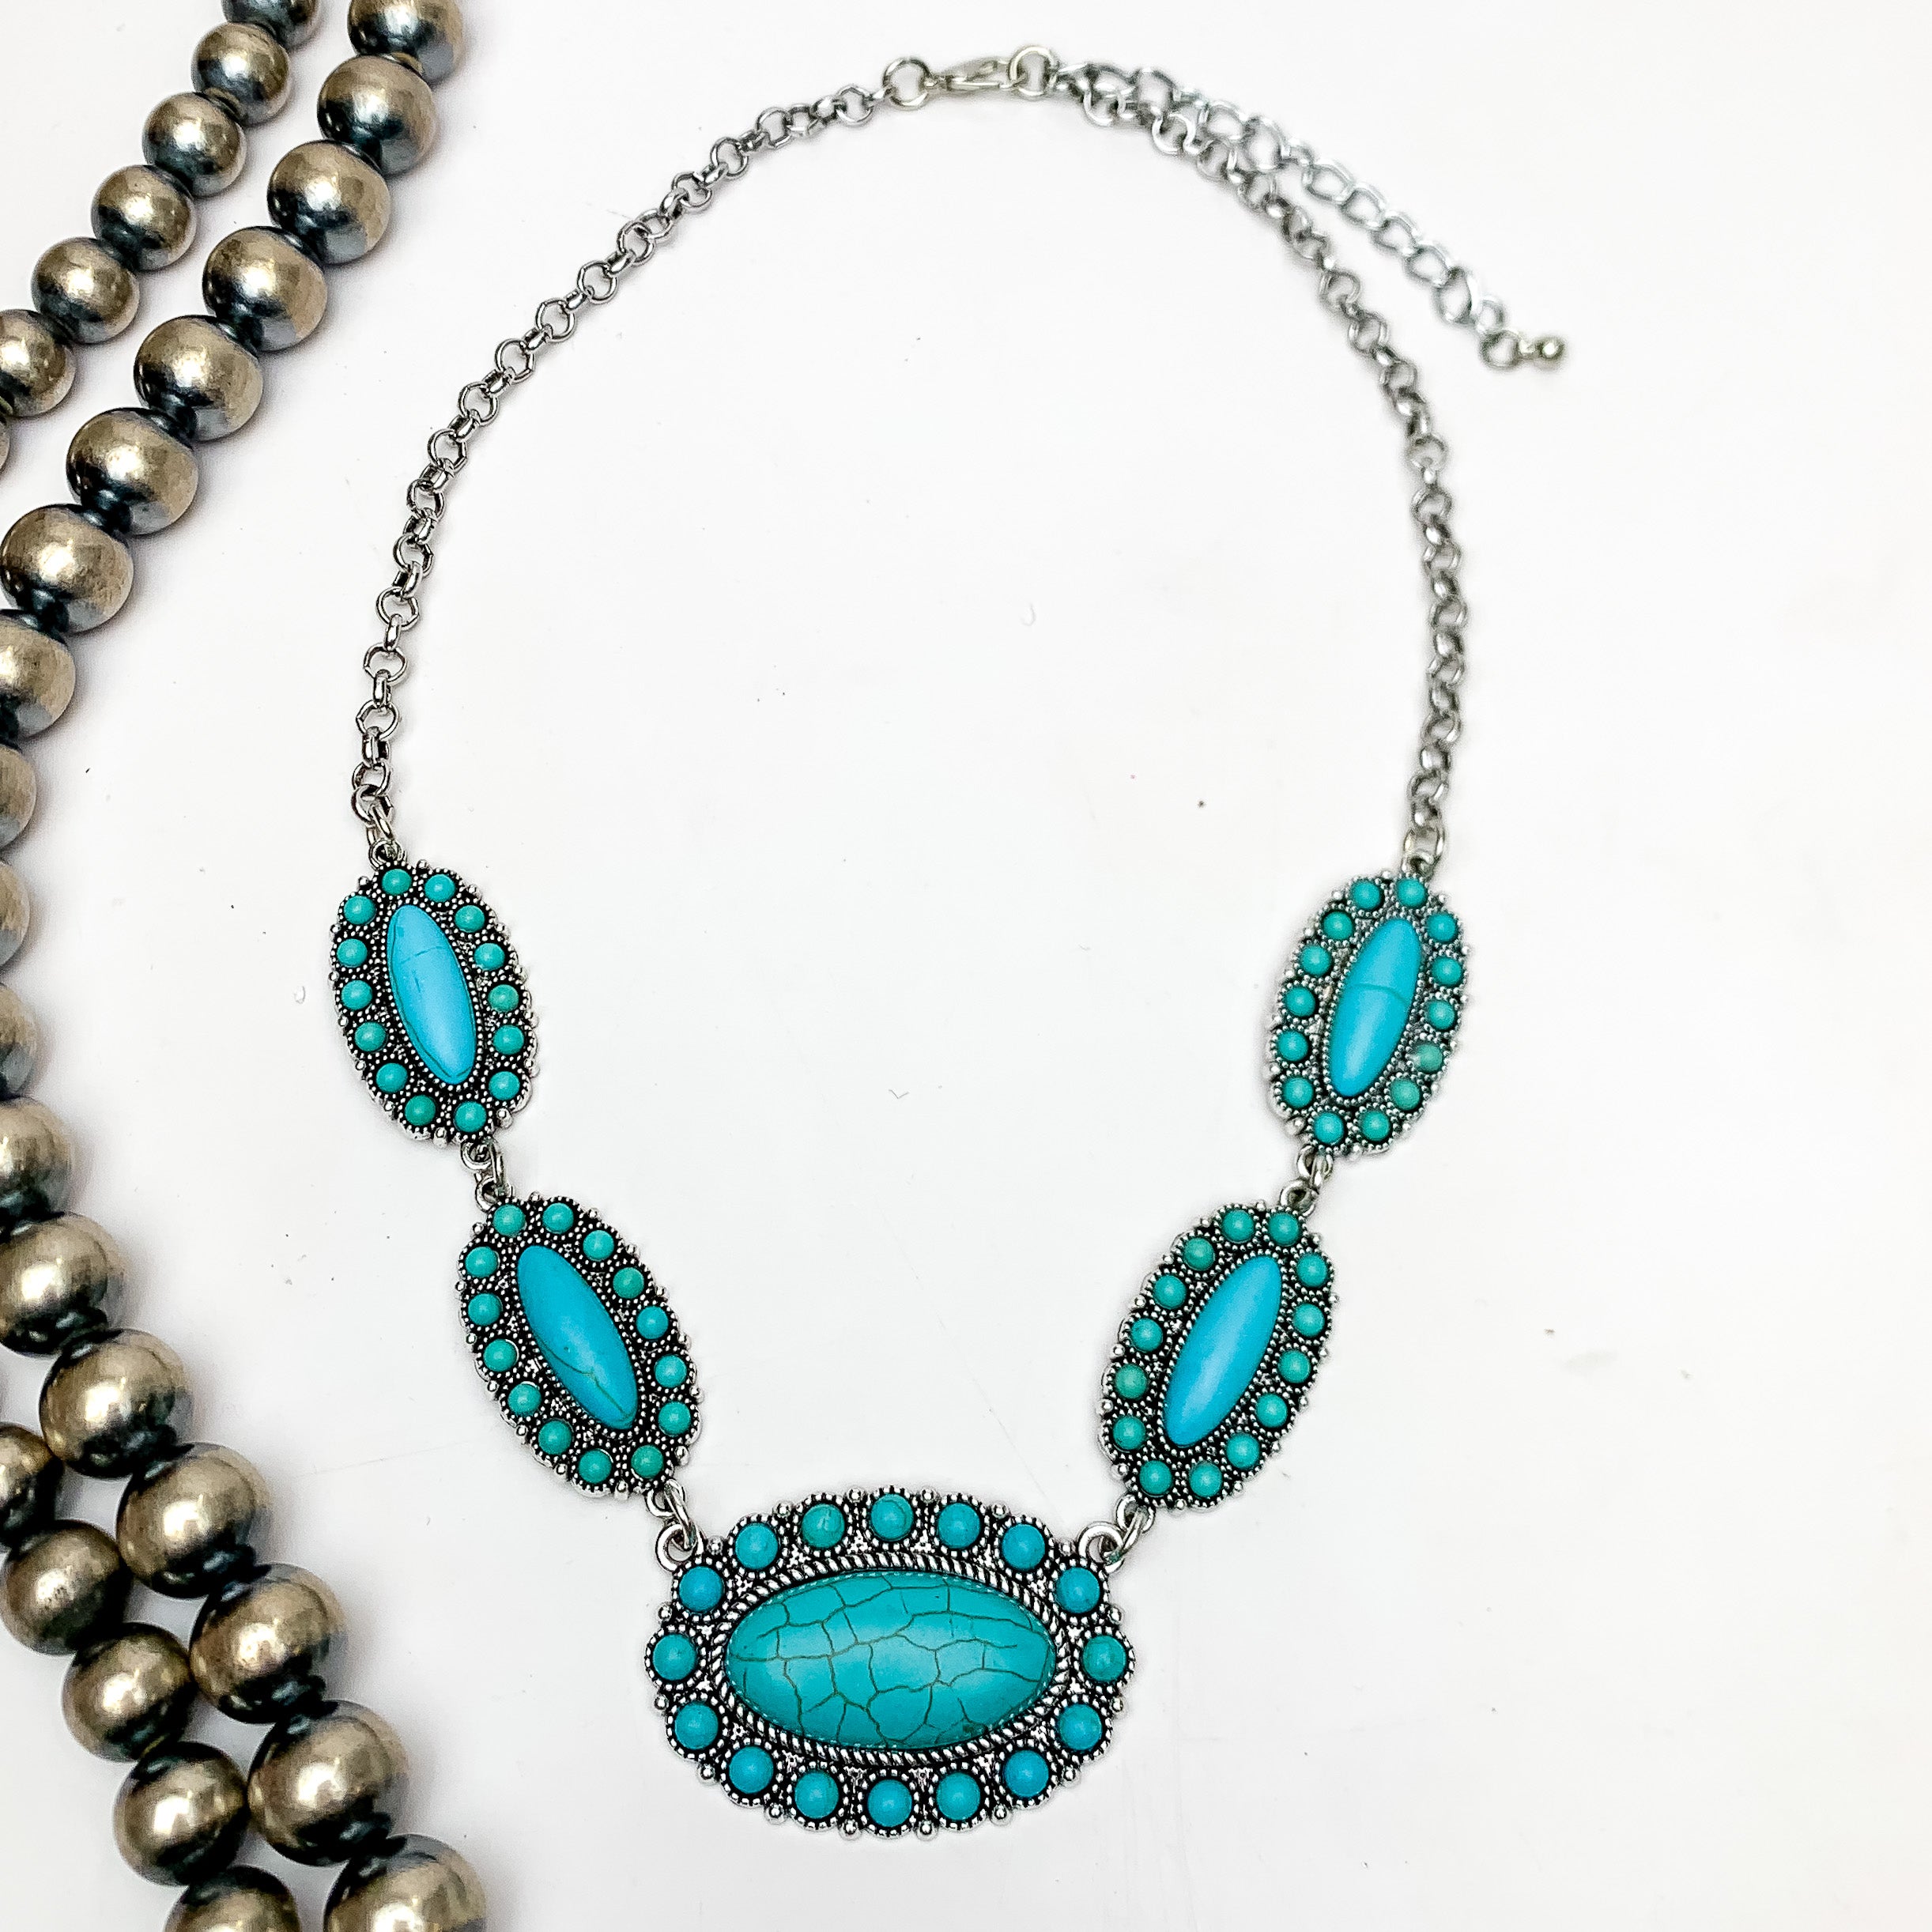 Western Silver Tone Necklace in turquoise blue. This necklace is on a white background with Navajo pearls on the left.